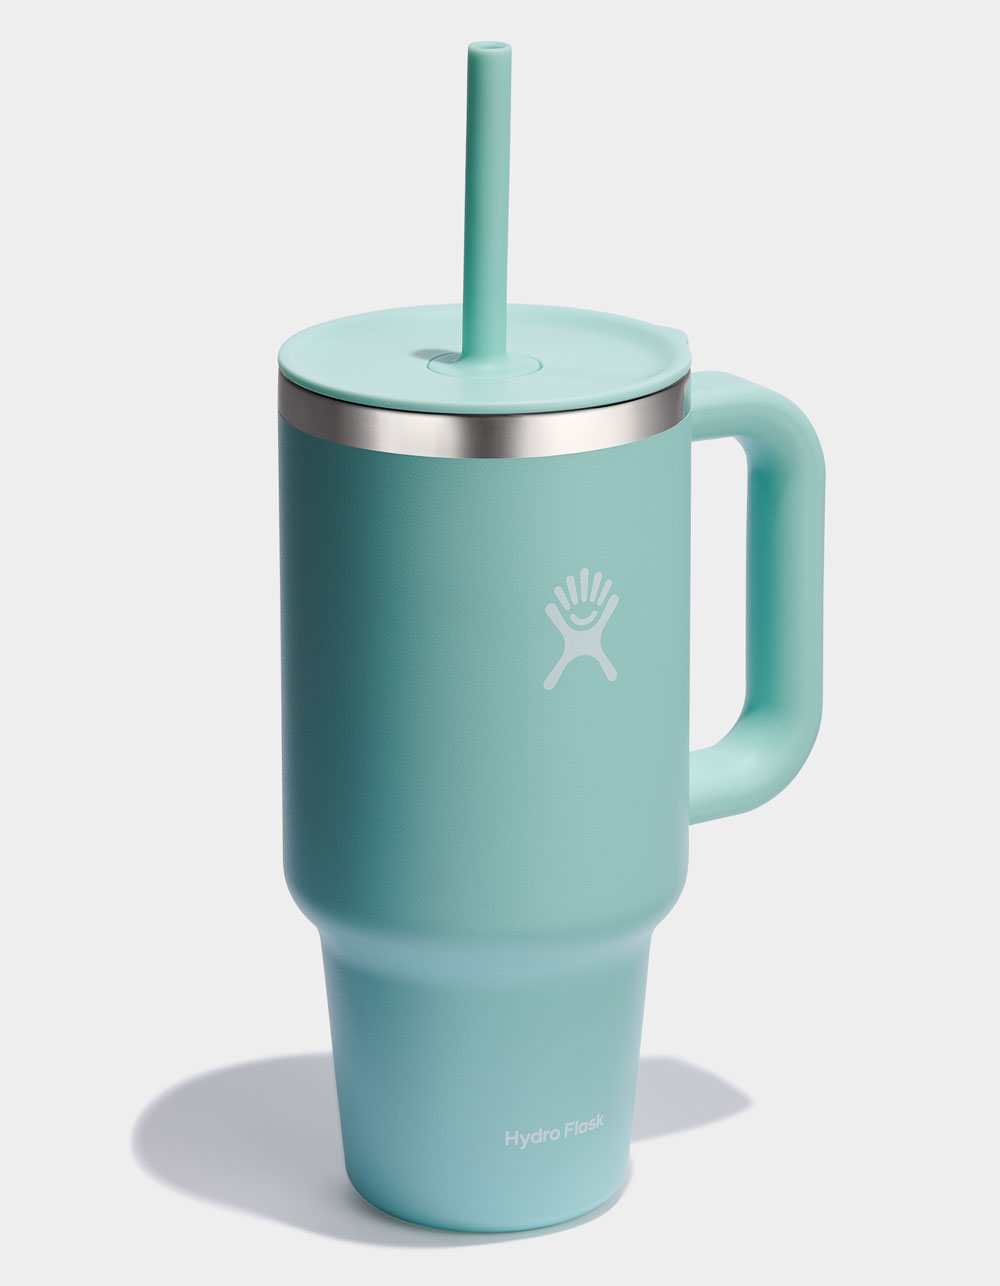 Tumbler Cups: Reviewing my 2 FAVES - Mint Arrow